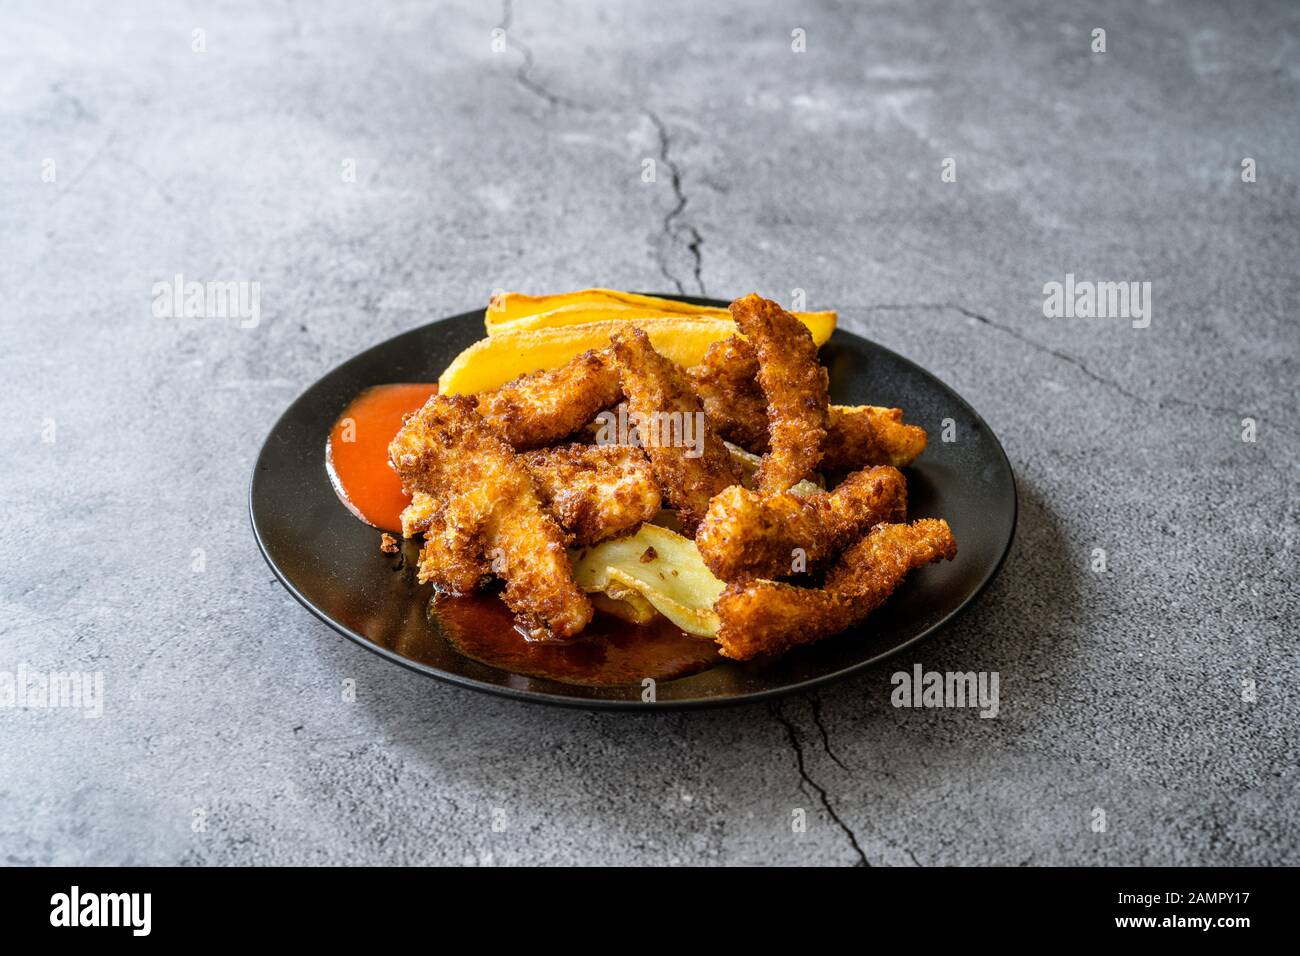 Fish and Chips made with Breaded and Fried Seabass in Black Plate. Fast Food. Stock Photo